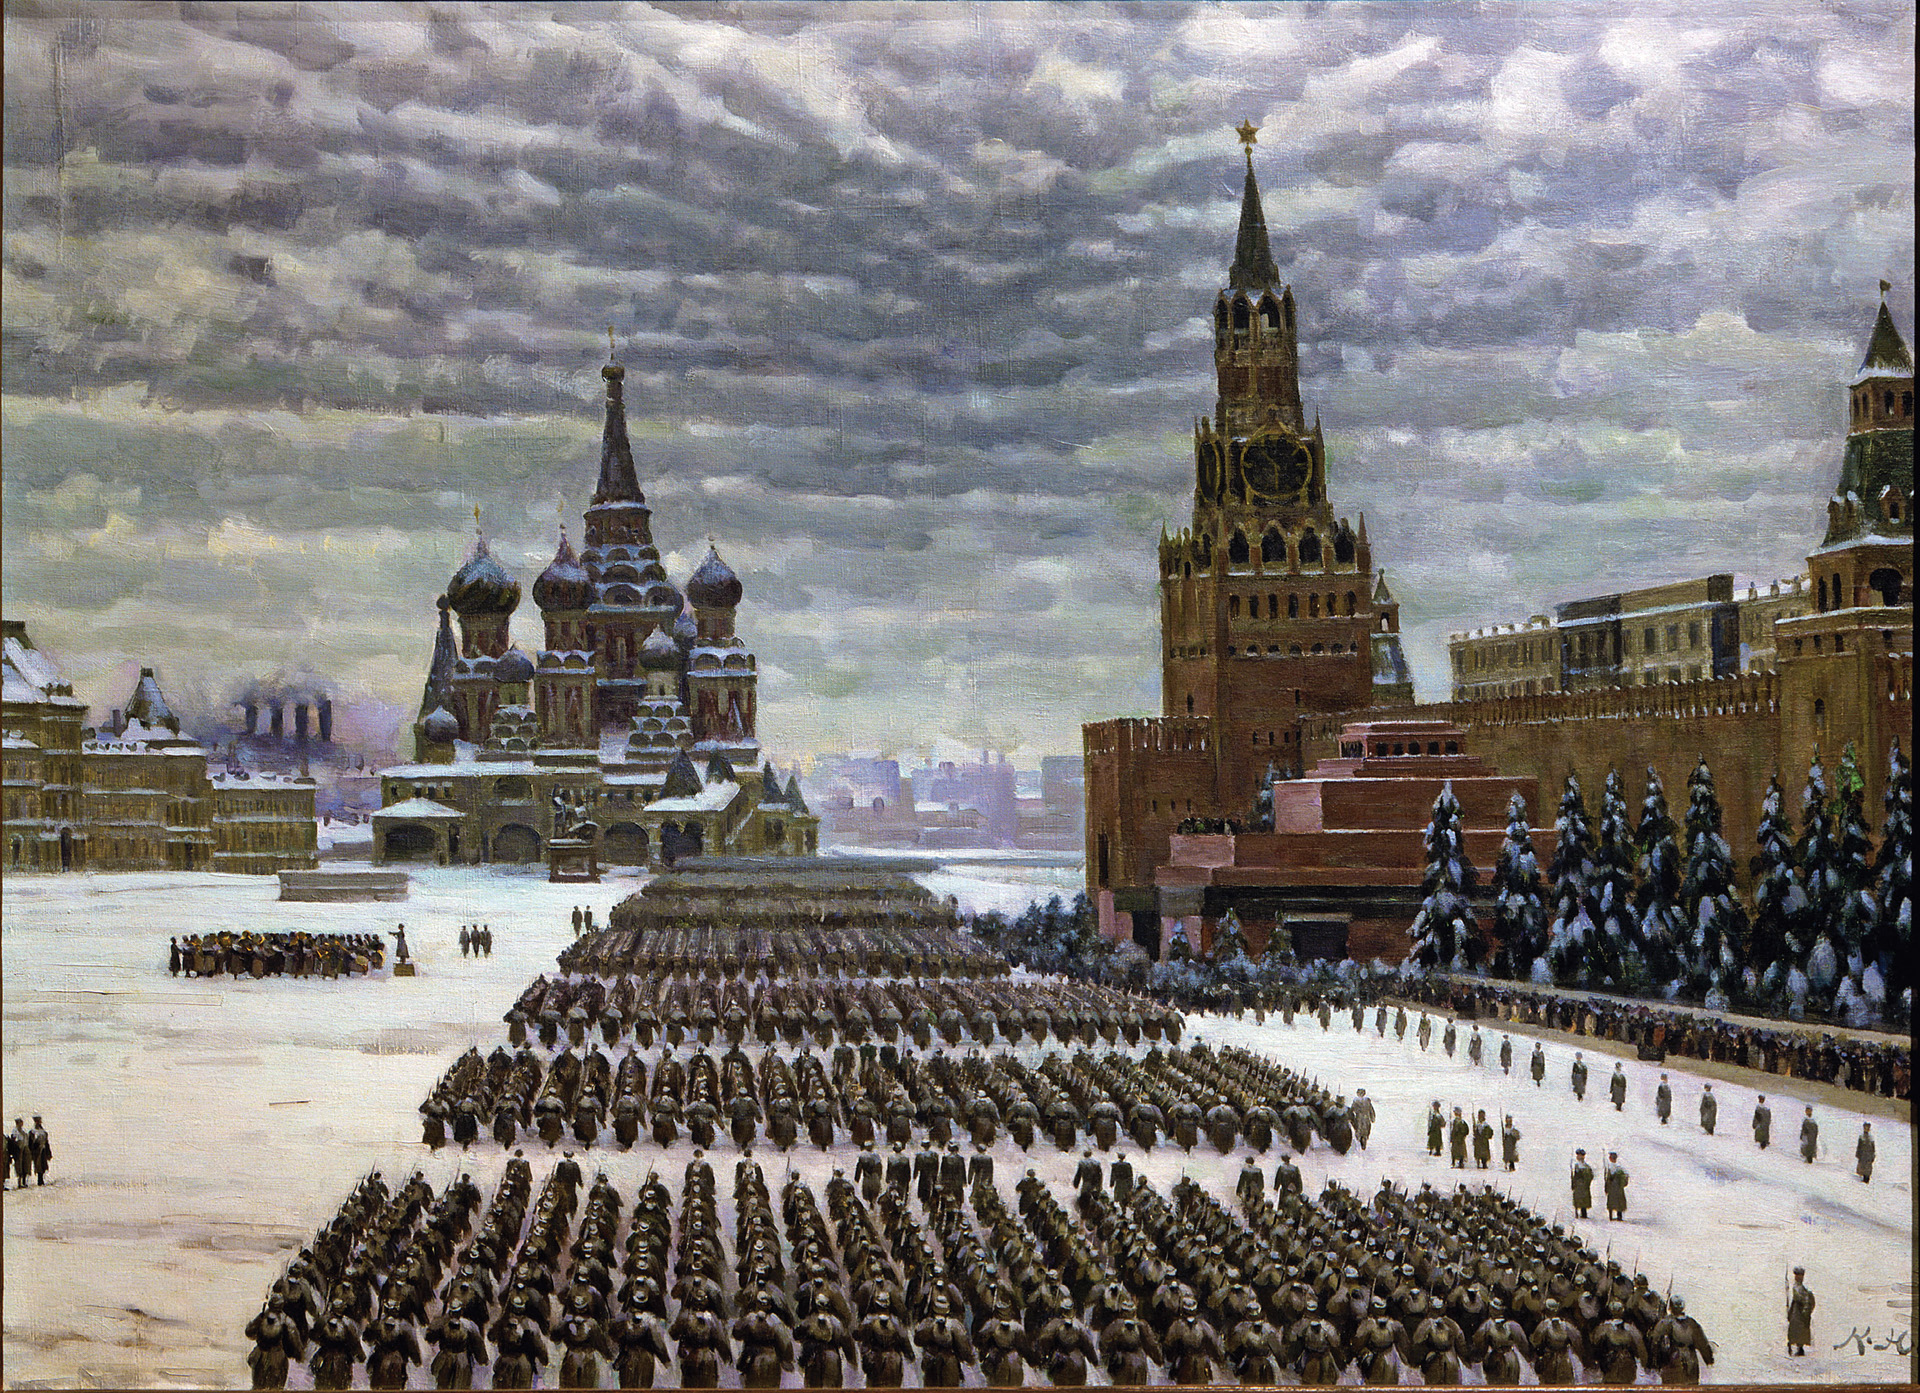 Although the spearheads of the invading German Army were only a few miles from the Soviet capital of Moscow, Premier Josef Stalin ordered the traditional parade celebrating the anniversary of the Russian Revolution of 1917 to go forward on November 7, 1941. Some German units on the outskirts of Moscow were close enough that officers were able to see the city’s onion domes and gleaming spires through their field glasses.